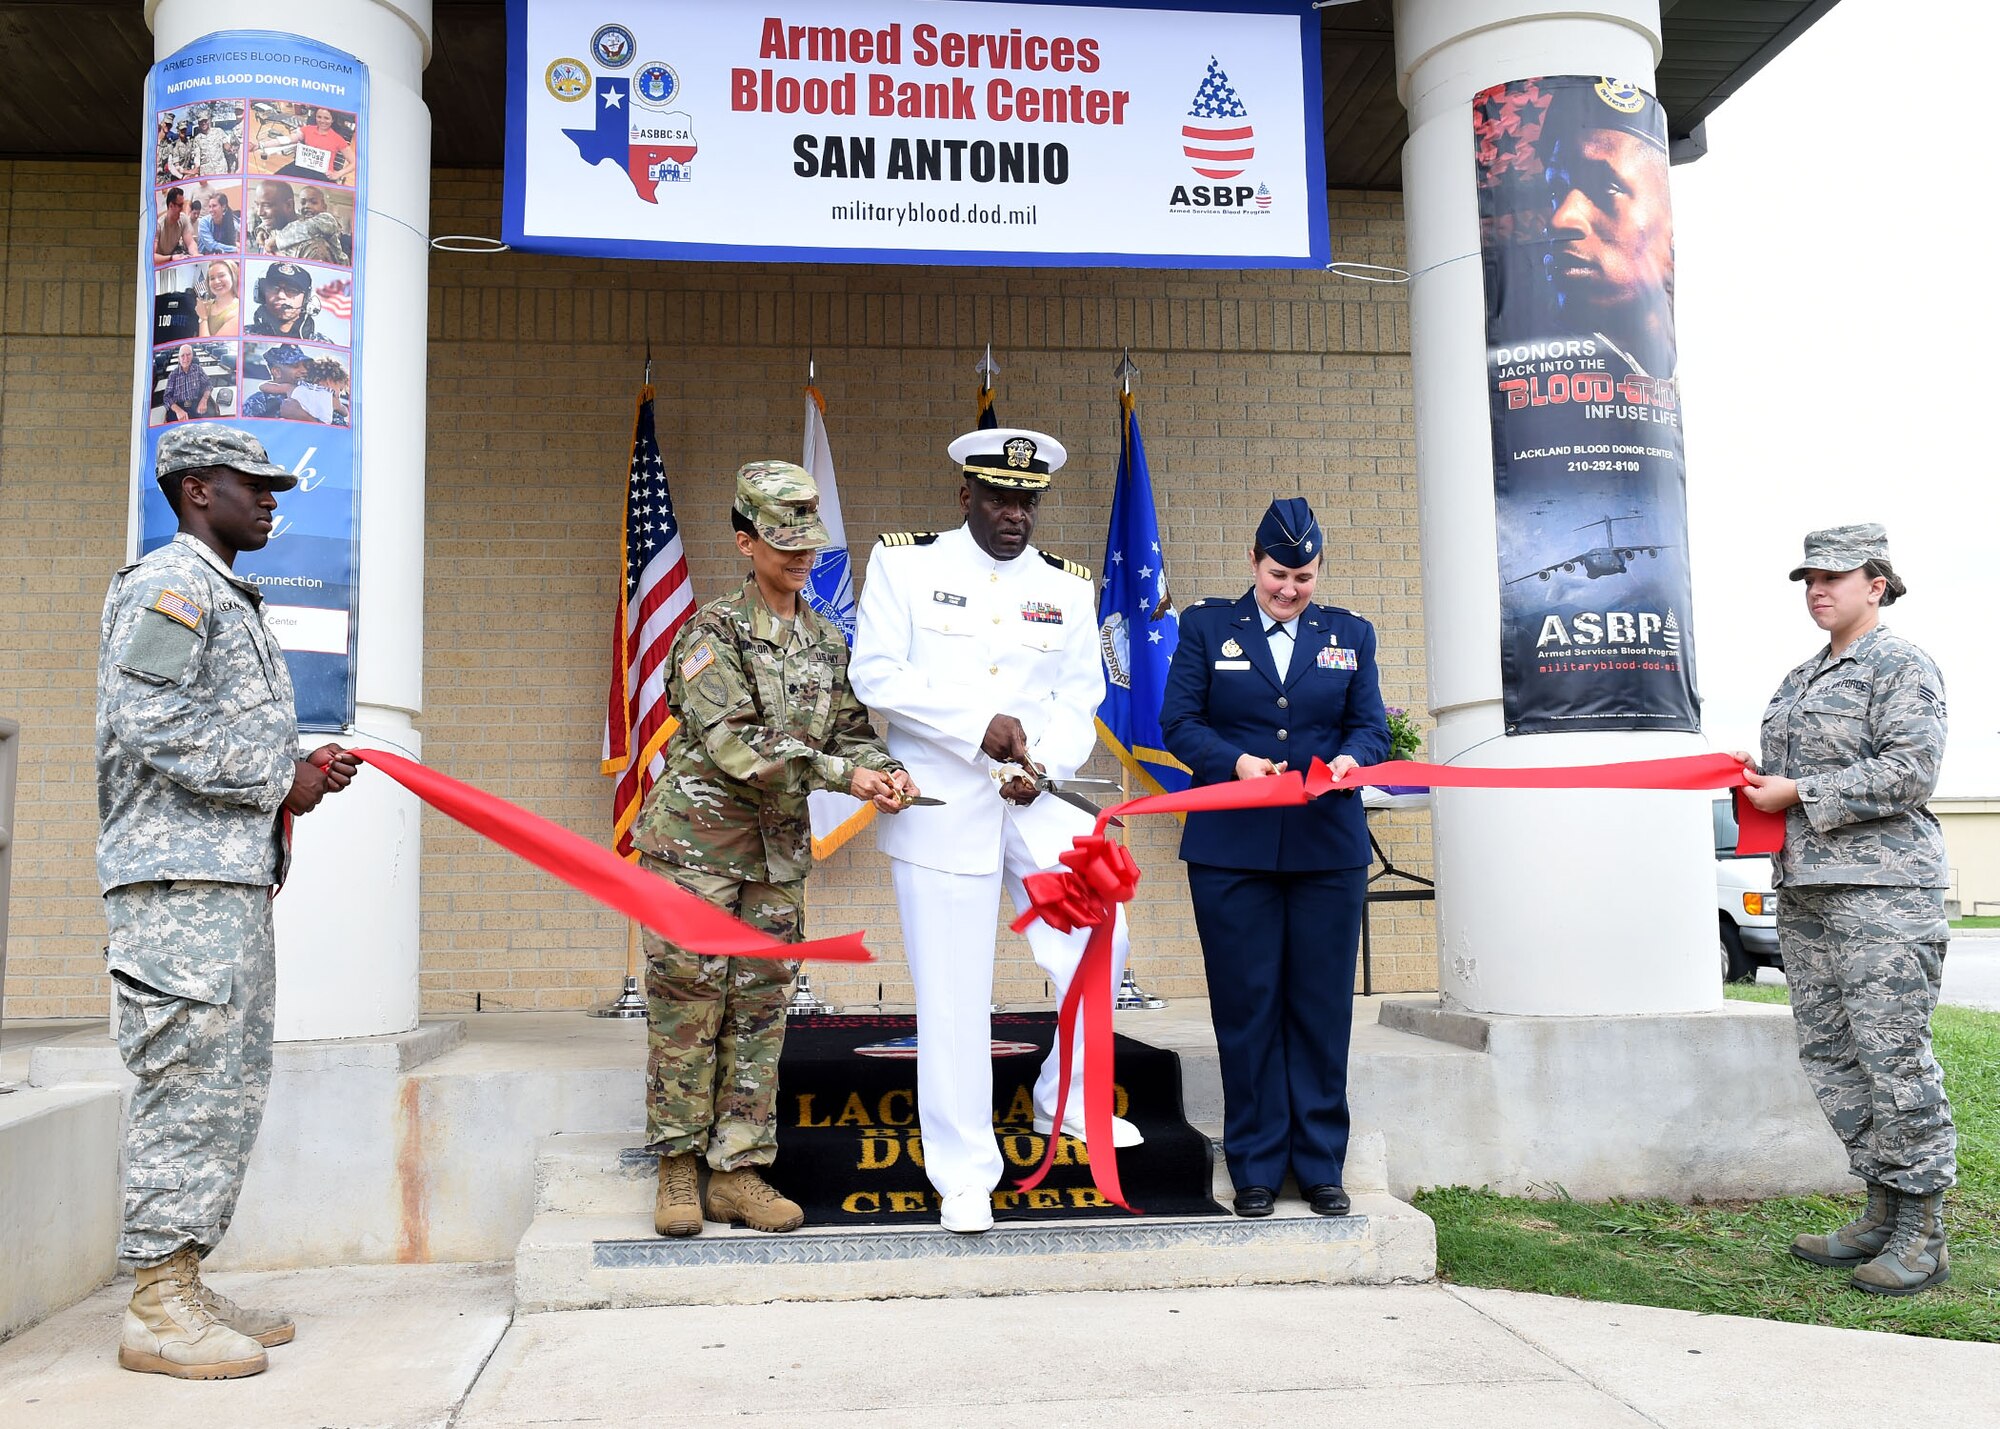 Navy Capt. Roland Fahie (center) cuts the ribbon to the Armed Services Blood Bank Center San Antonio during a recent ceremony. The blood bank, led by the 59th Medical Wing, is a tri-service venture involving the Army, Navy, and Air Force. Fahie is the Department of Defense Director of the Armed Services Blood Program. (U.S. Air Force photo/Tech. Sgt. Christopher Carwile)